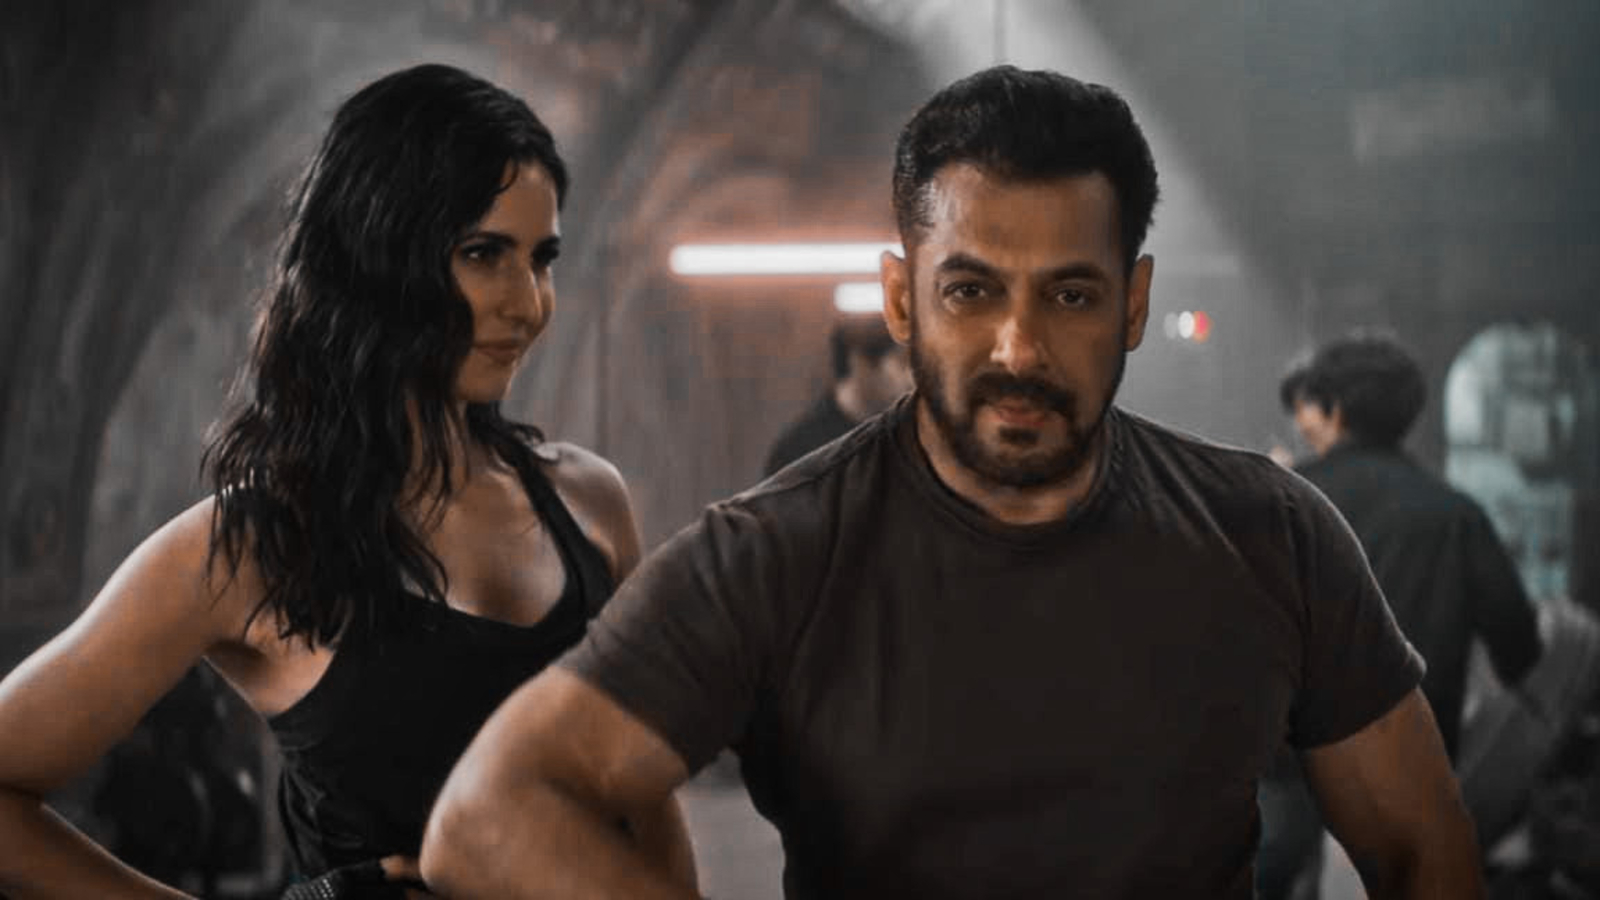 Salman Khan fans can’t keep calm after Tiger 3 teaser: ‘He is coming to revive Bollywood’